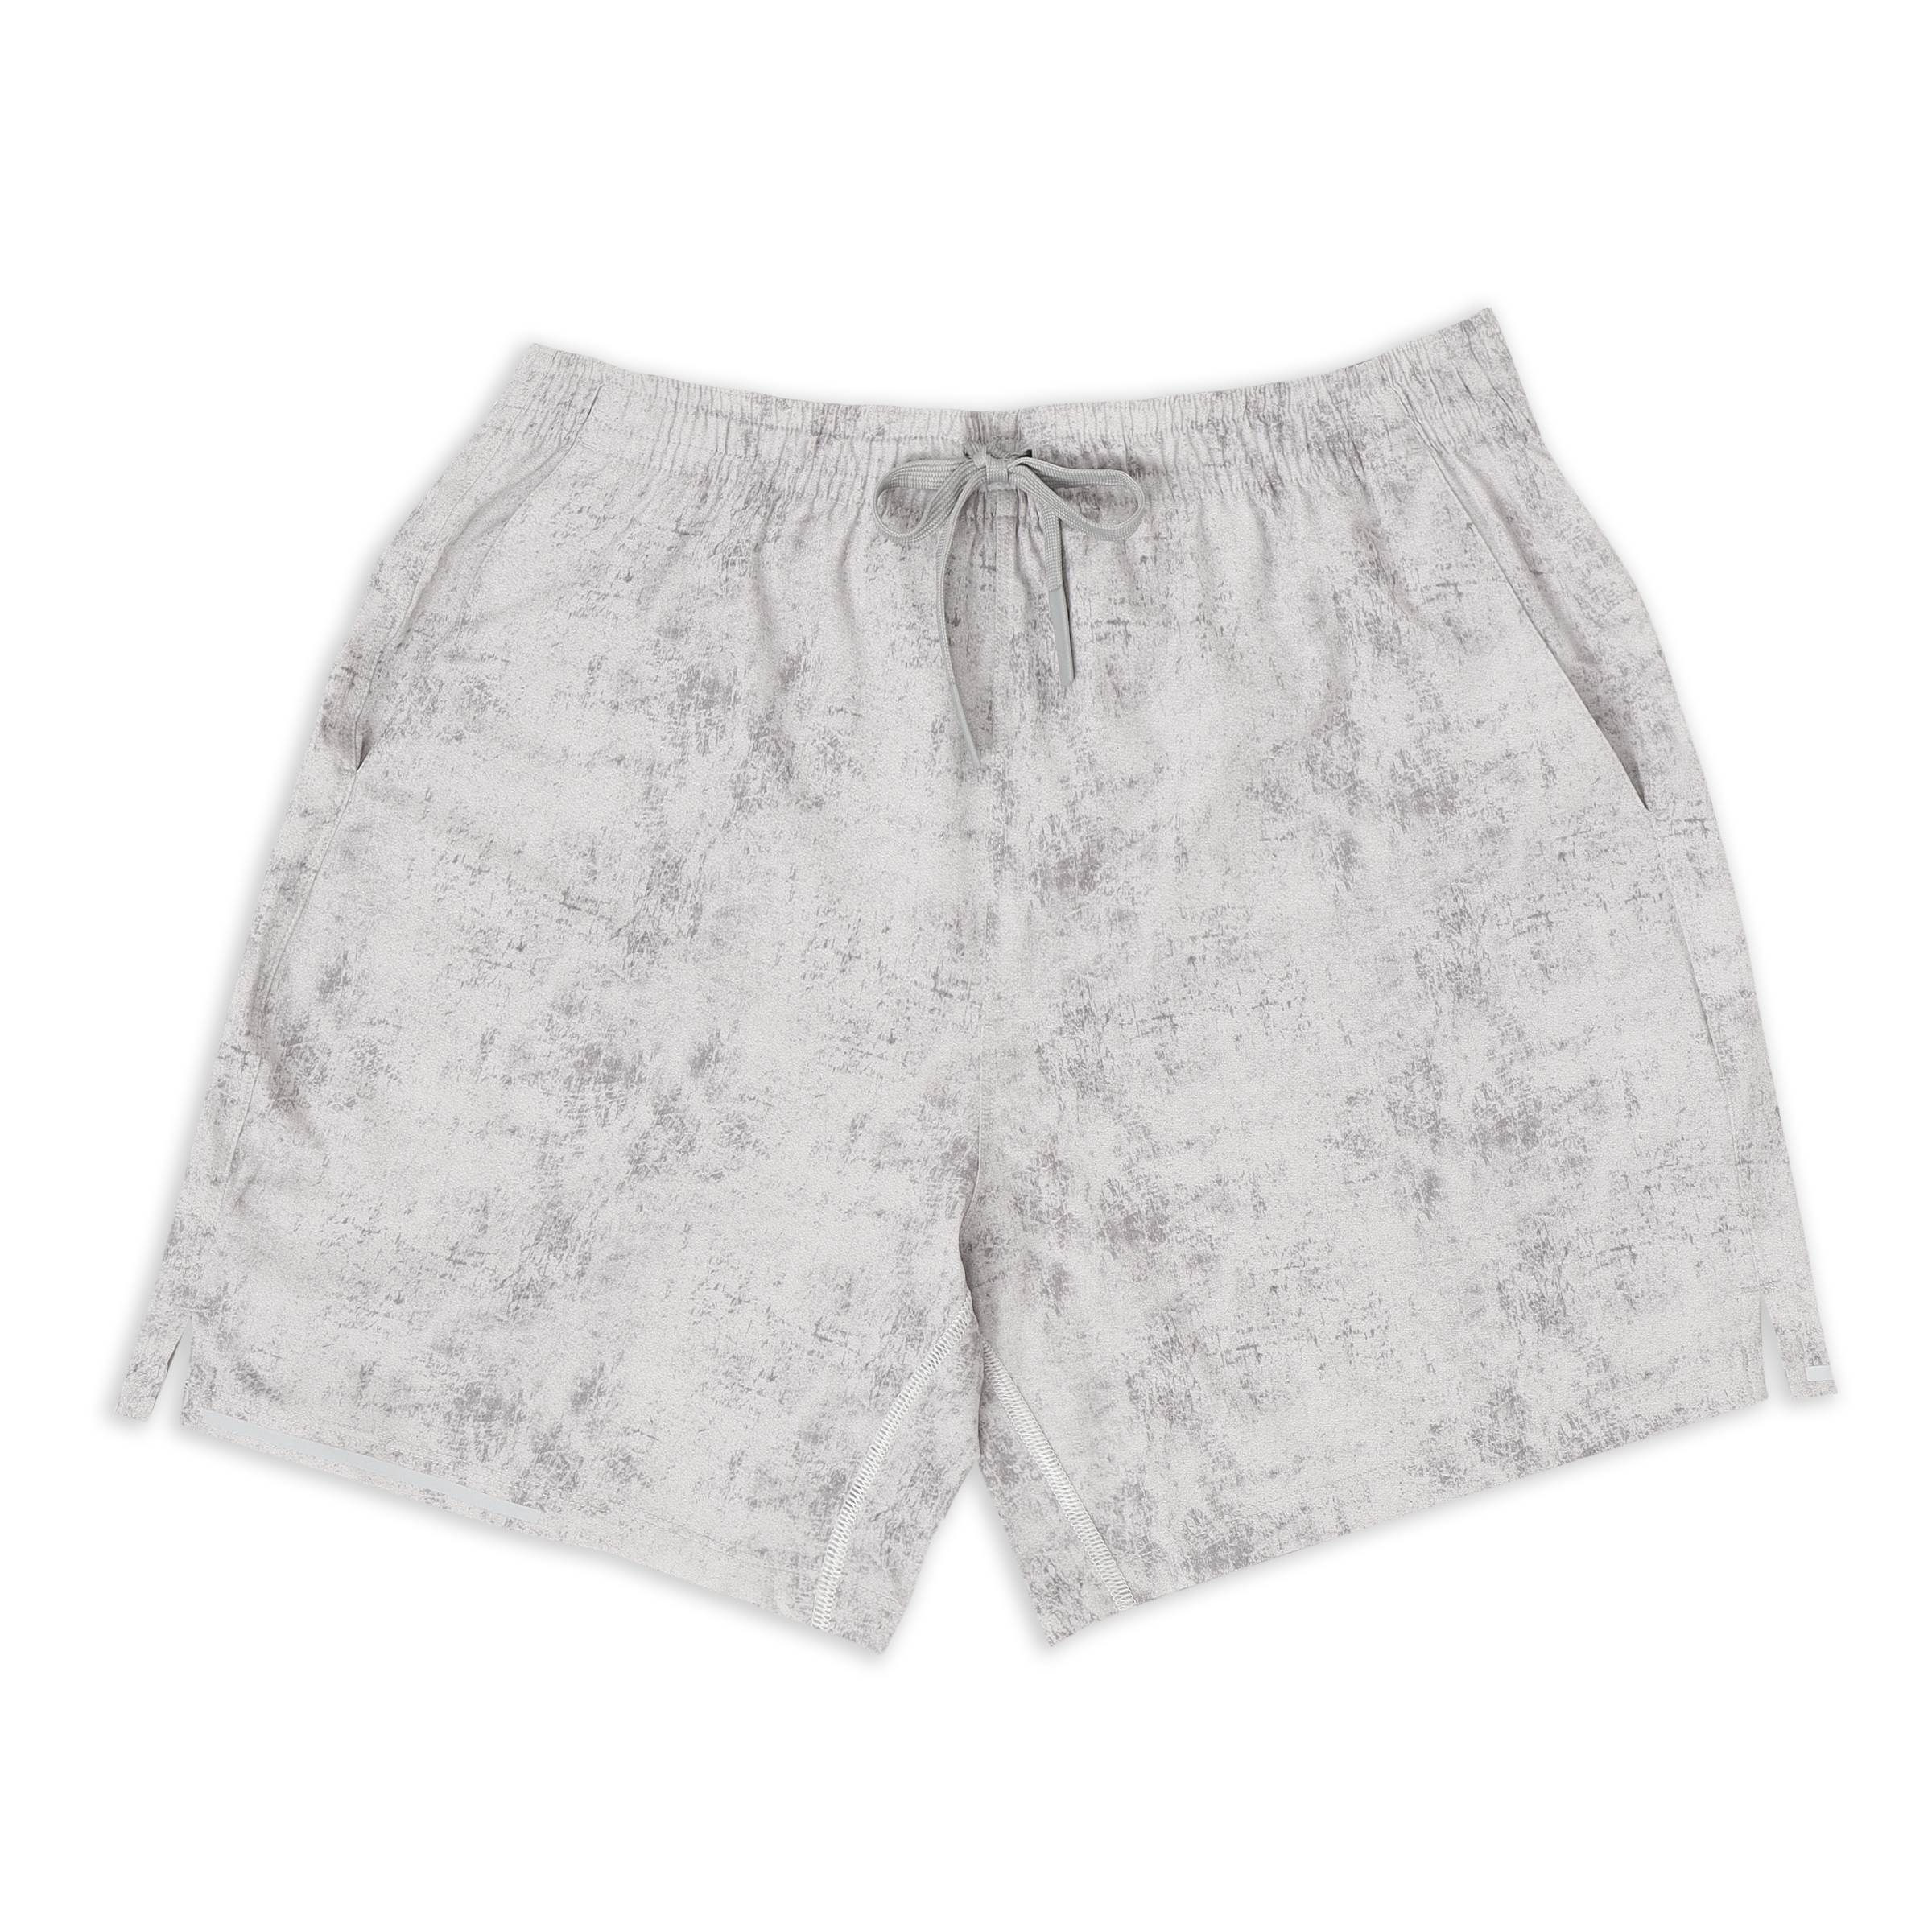 Run Short 5.5" Concrete front with elastic waistband, dyed-to-match drawstring with rubberized tips, two front pockets, split hem, and reflective line on bottom right hem